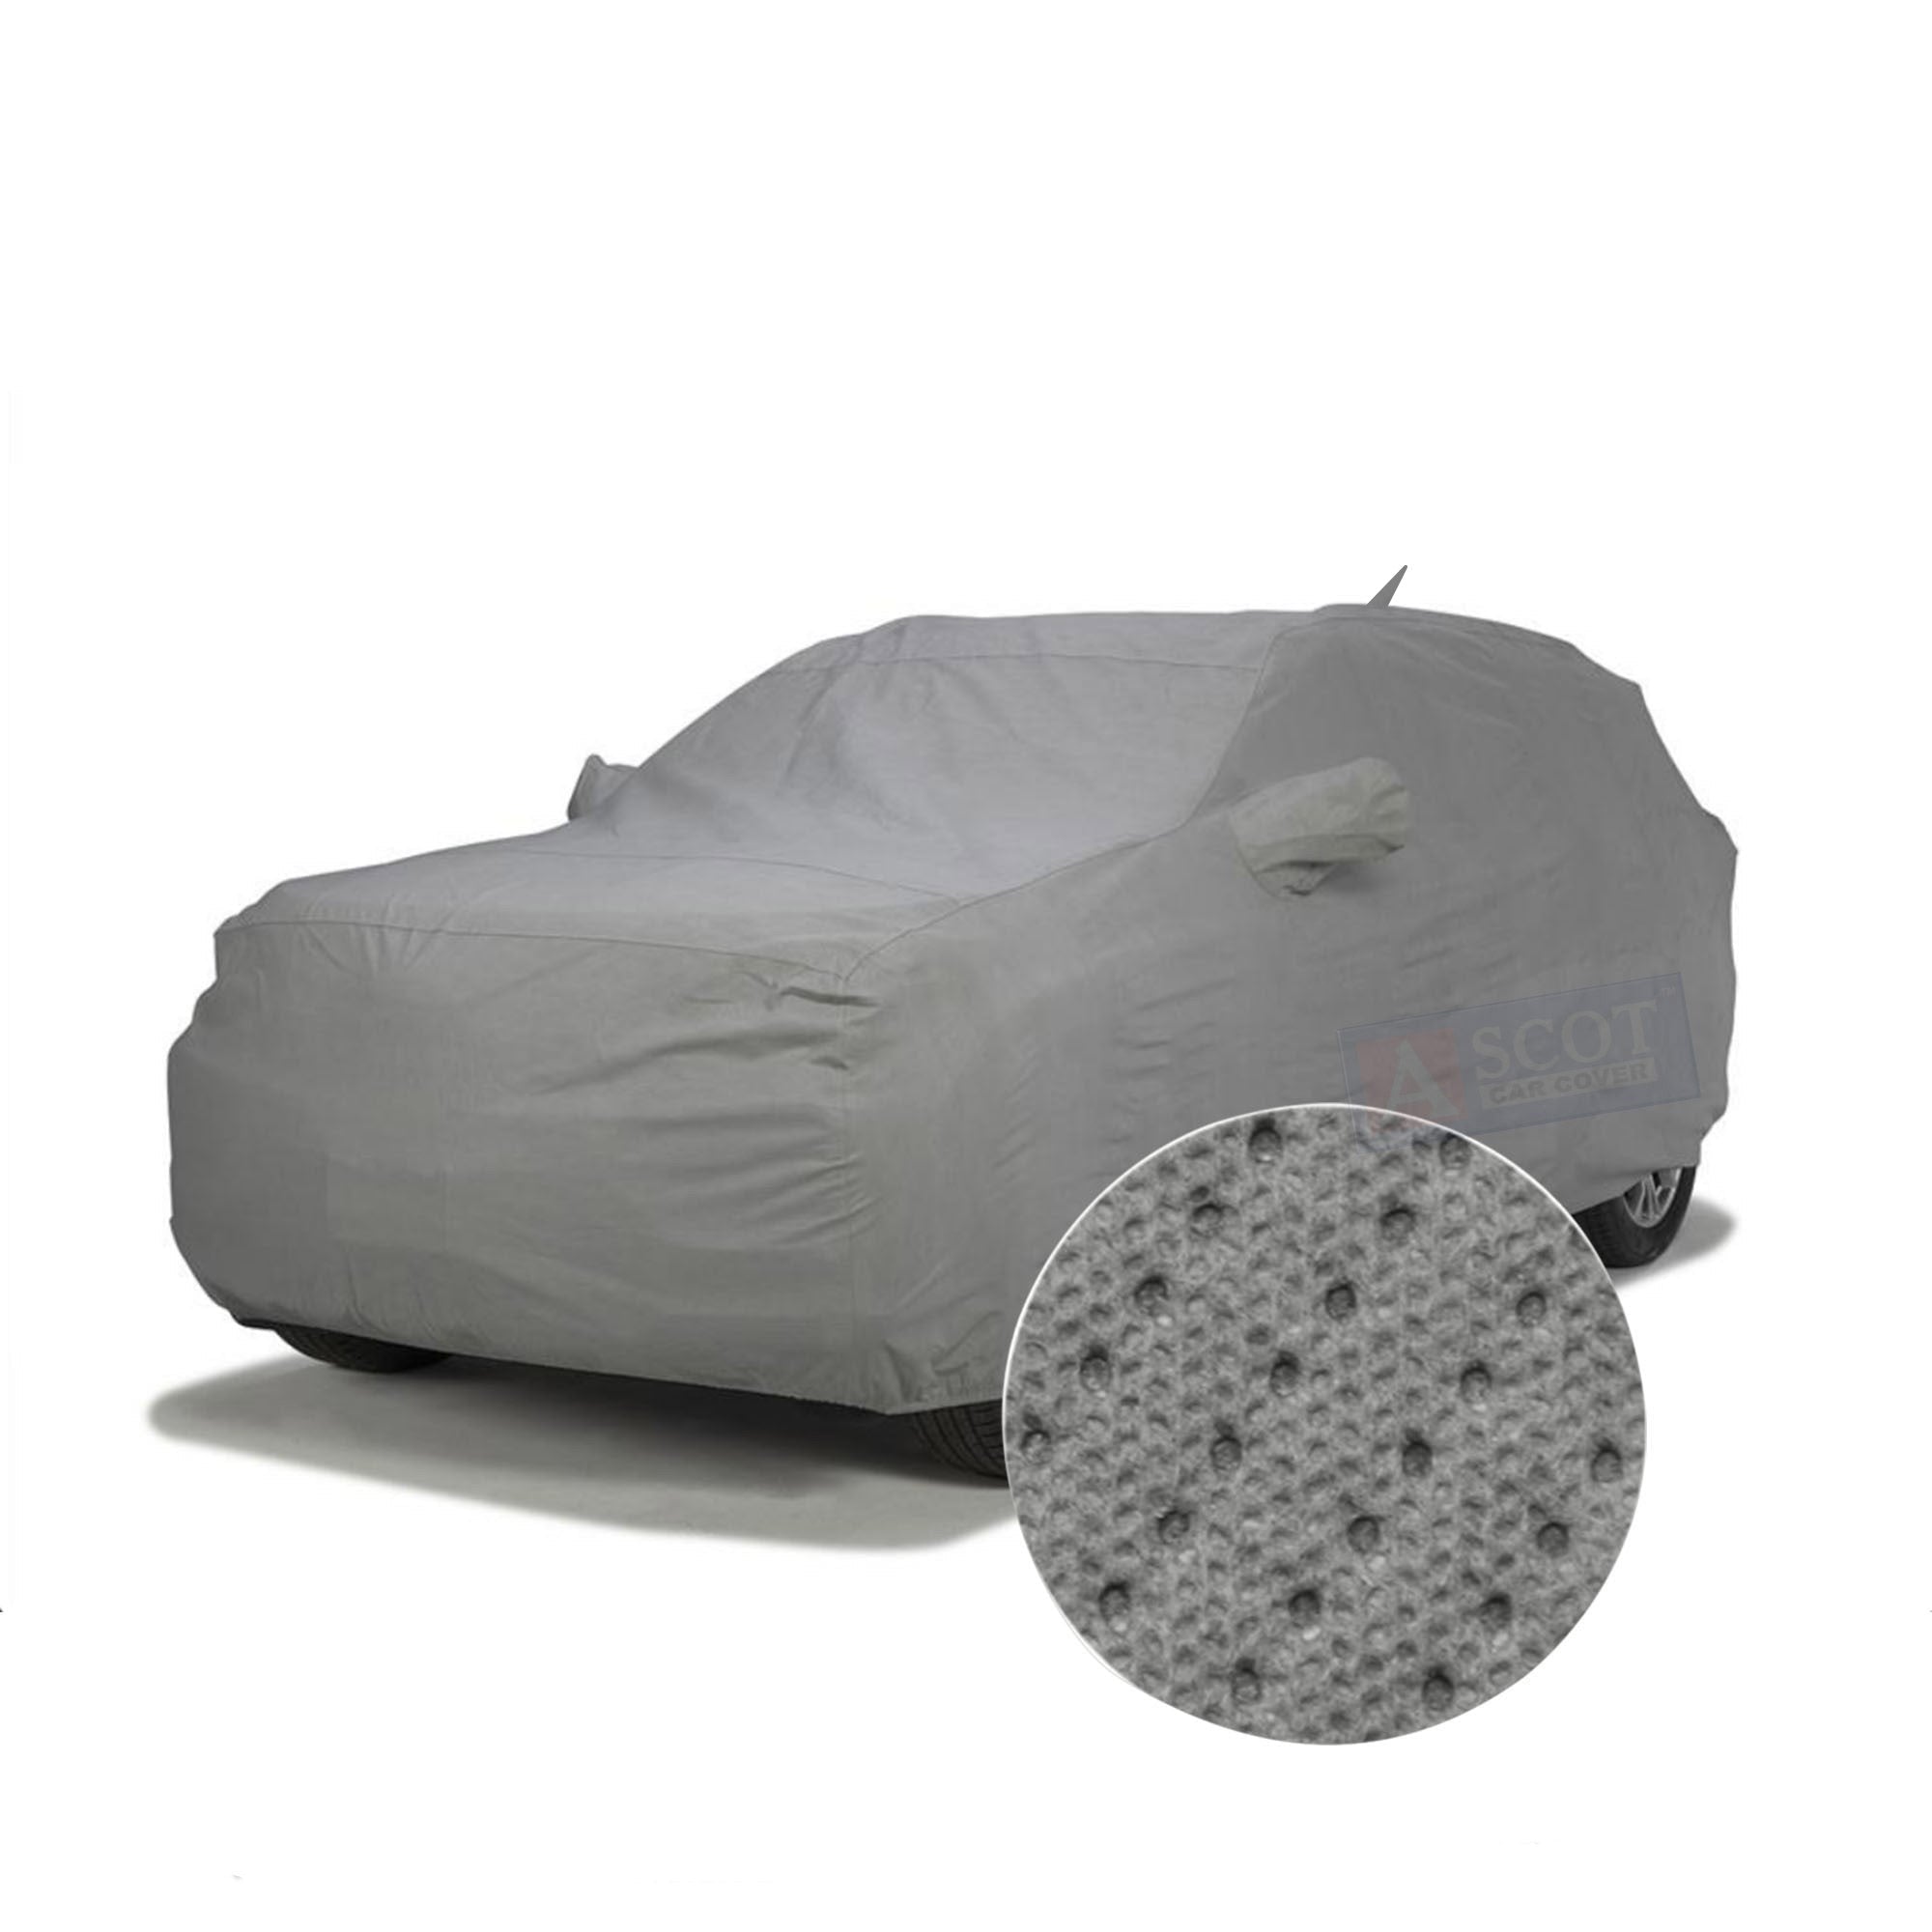 Car Top Cover For New Suzuki Swift 2022 Silver Parachute Material